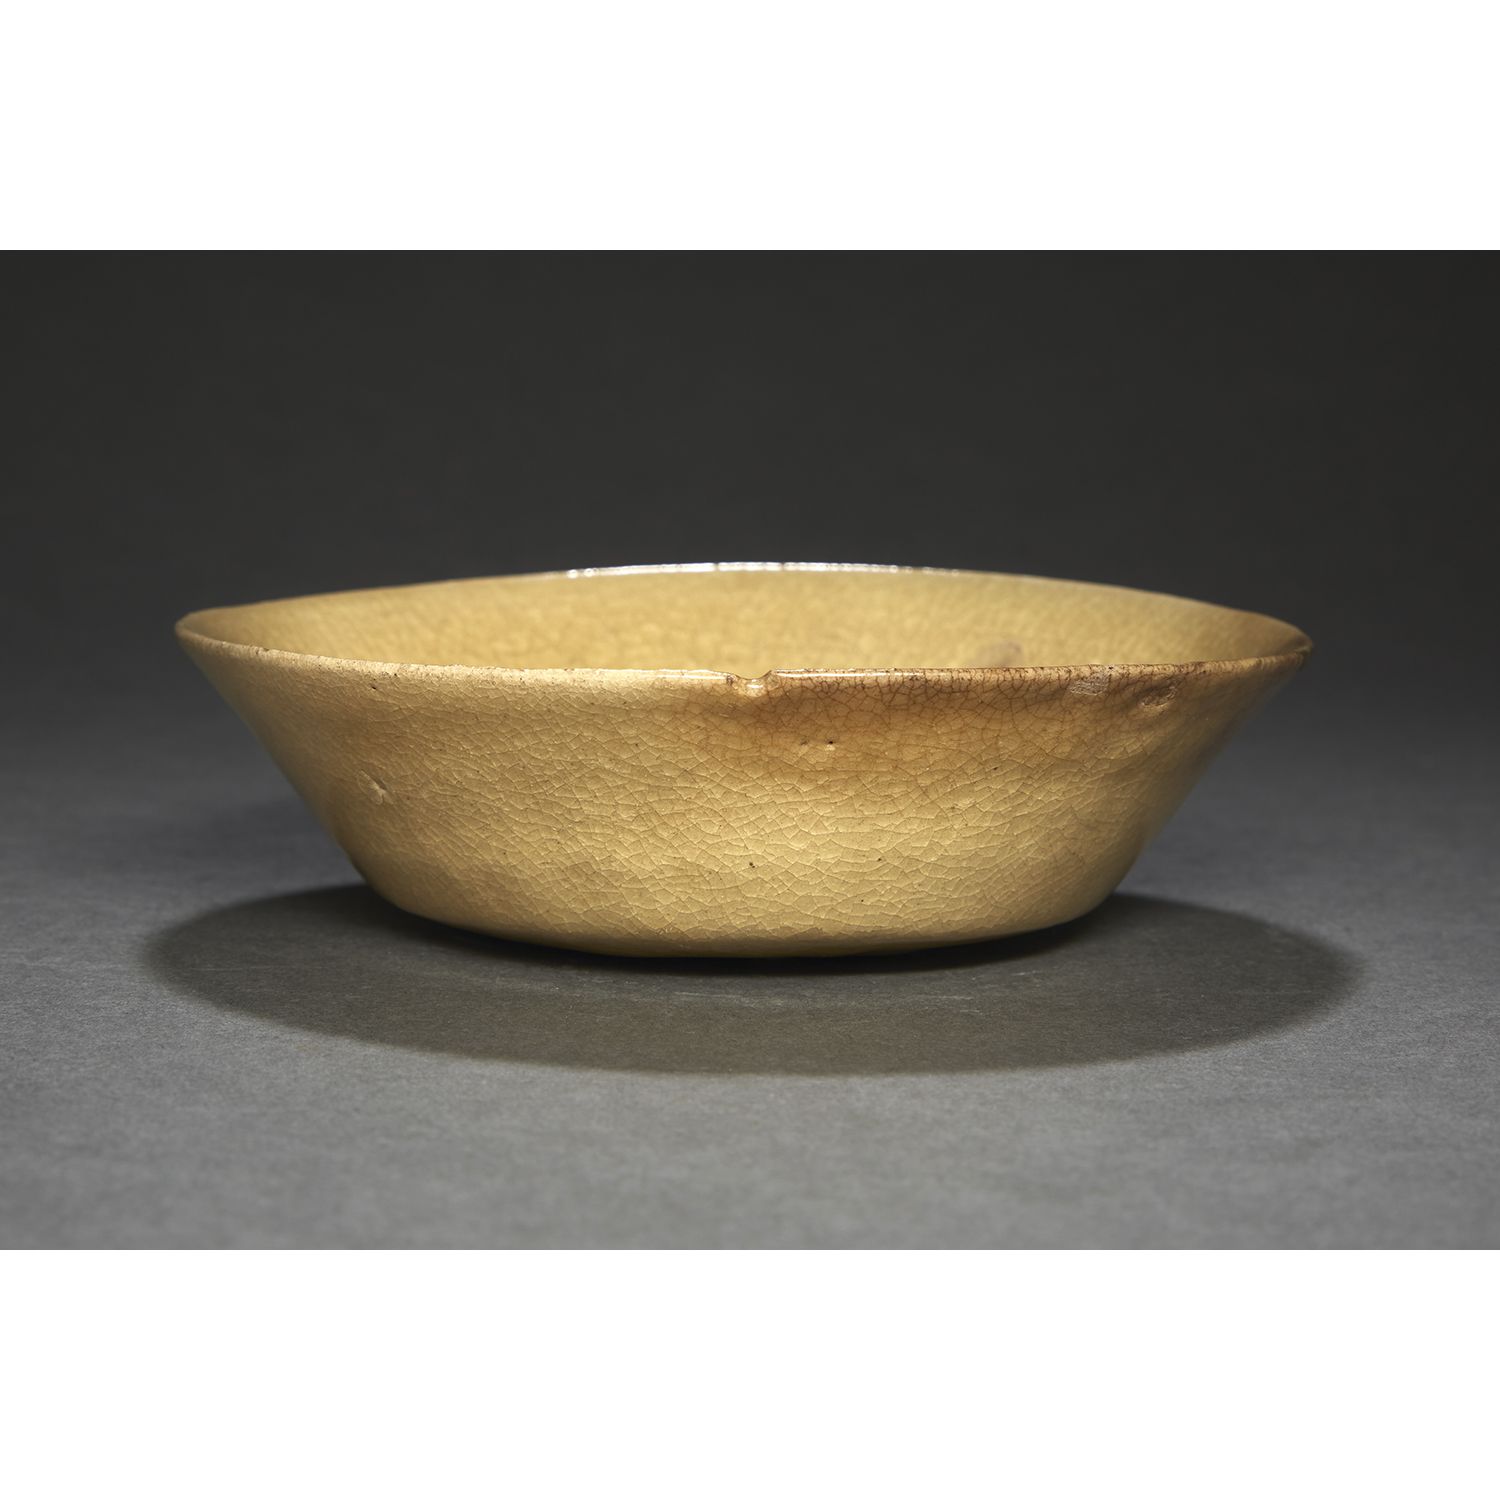 Null COUPELLE
in yellow-brown enamelled stoneware on cracked bottom. The thin an&hellip;